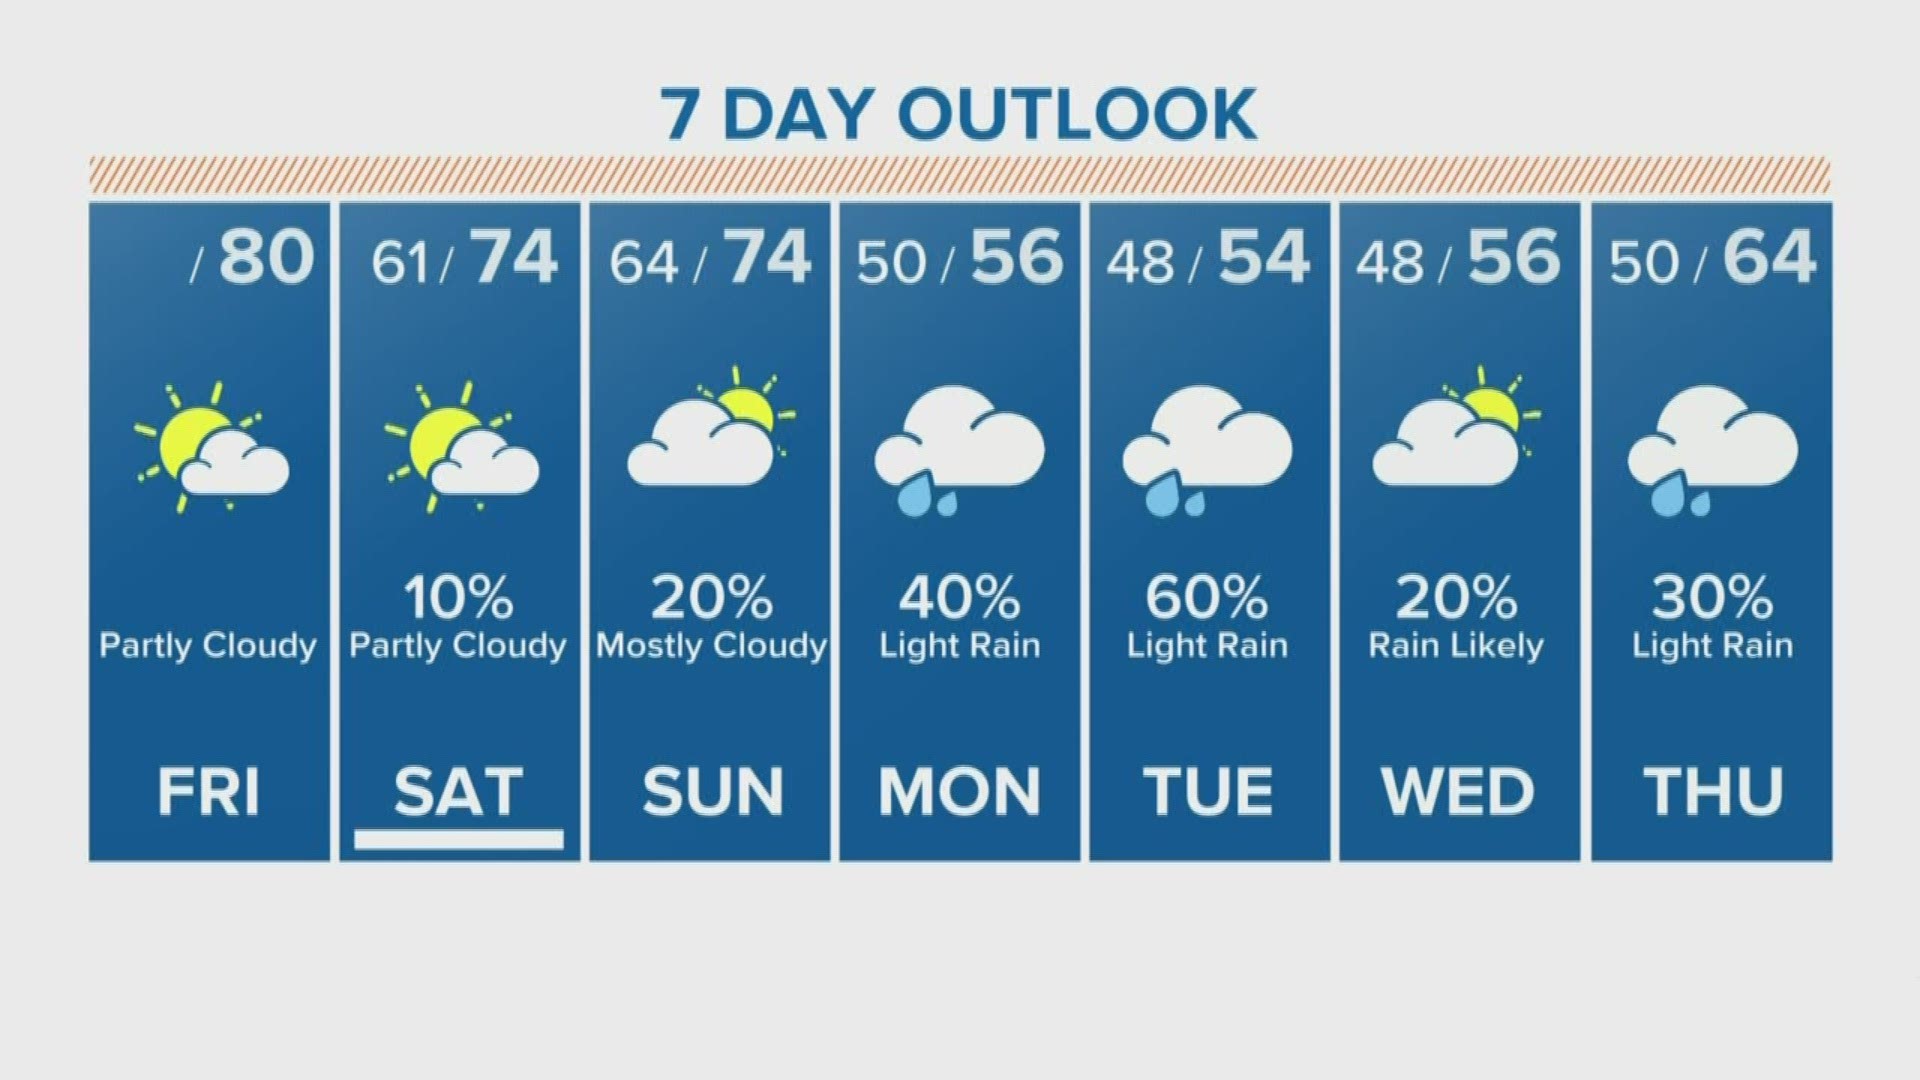 Expect to see temperatures in the upper-70s on Friday